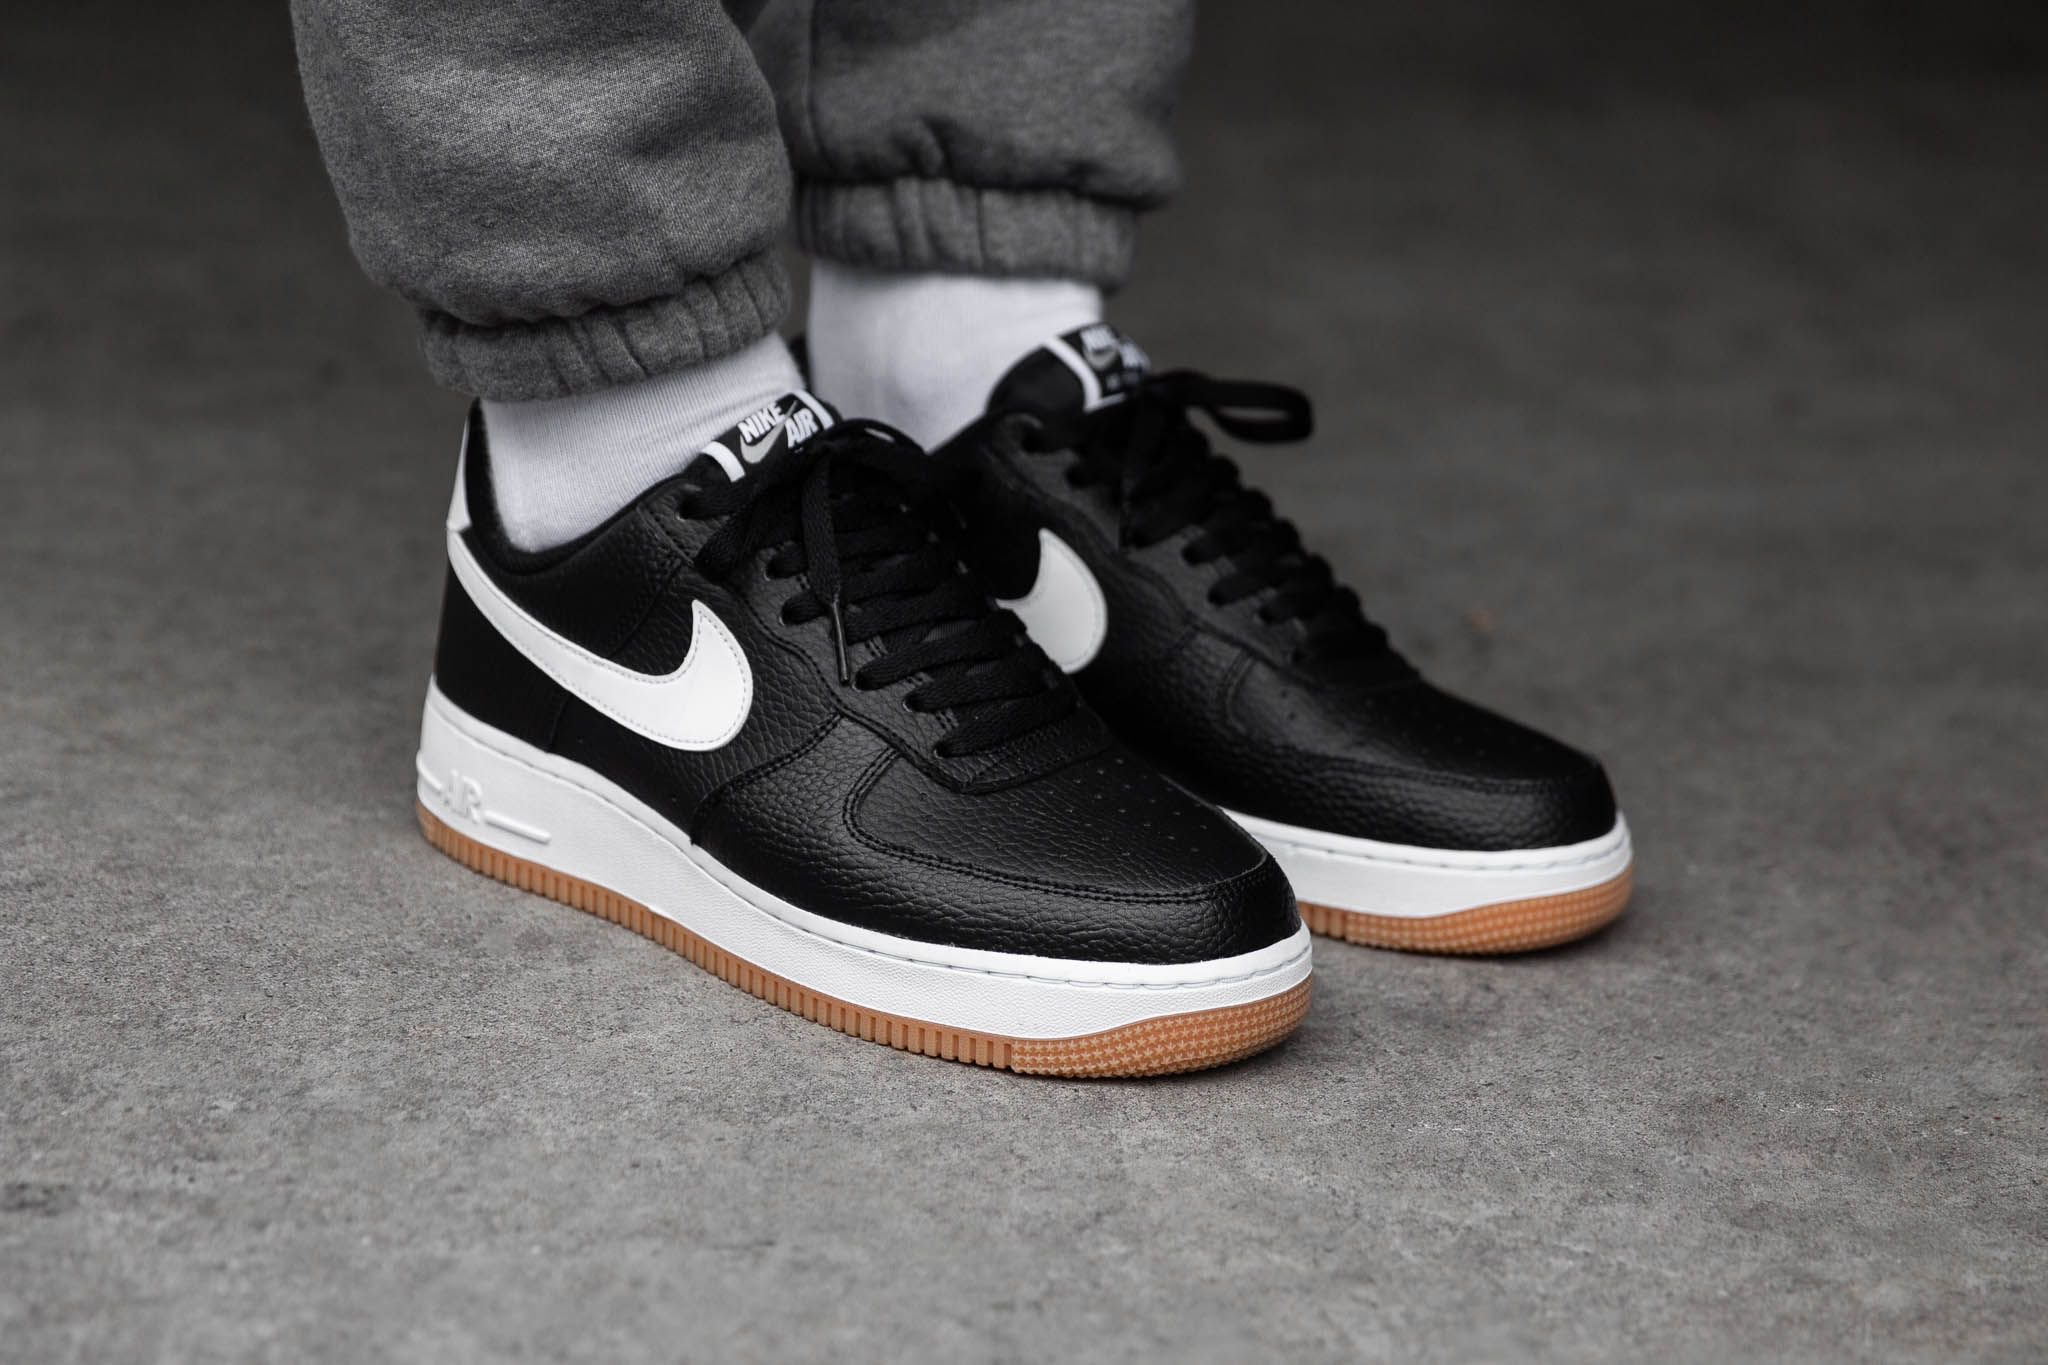 Titolo on Twitter: "Nike Air Force 1 Low "Black/White-Wolf Grey-Gum Med  Brown" get yours ➡️ https://t.co/HA1jFRMsuW US 7 (40) - US 12 (46)⁠ style  code 🔎 CI0057-002⁠ #titolo #nike #titolostyle #airforce1 #af1 ⁠ #